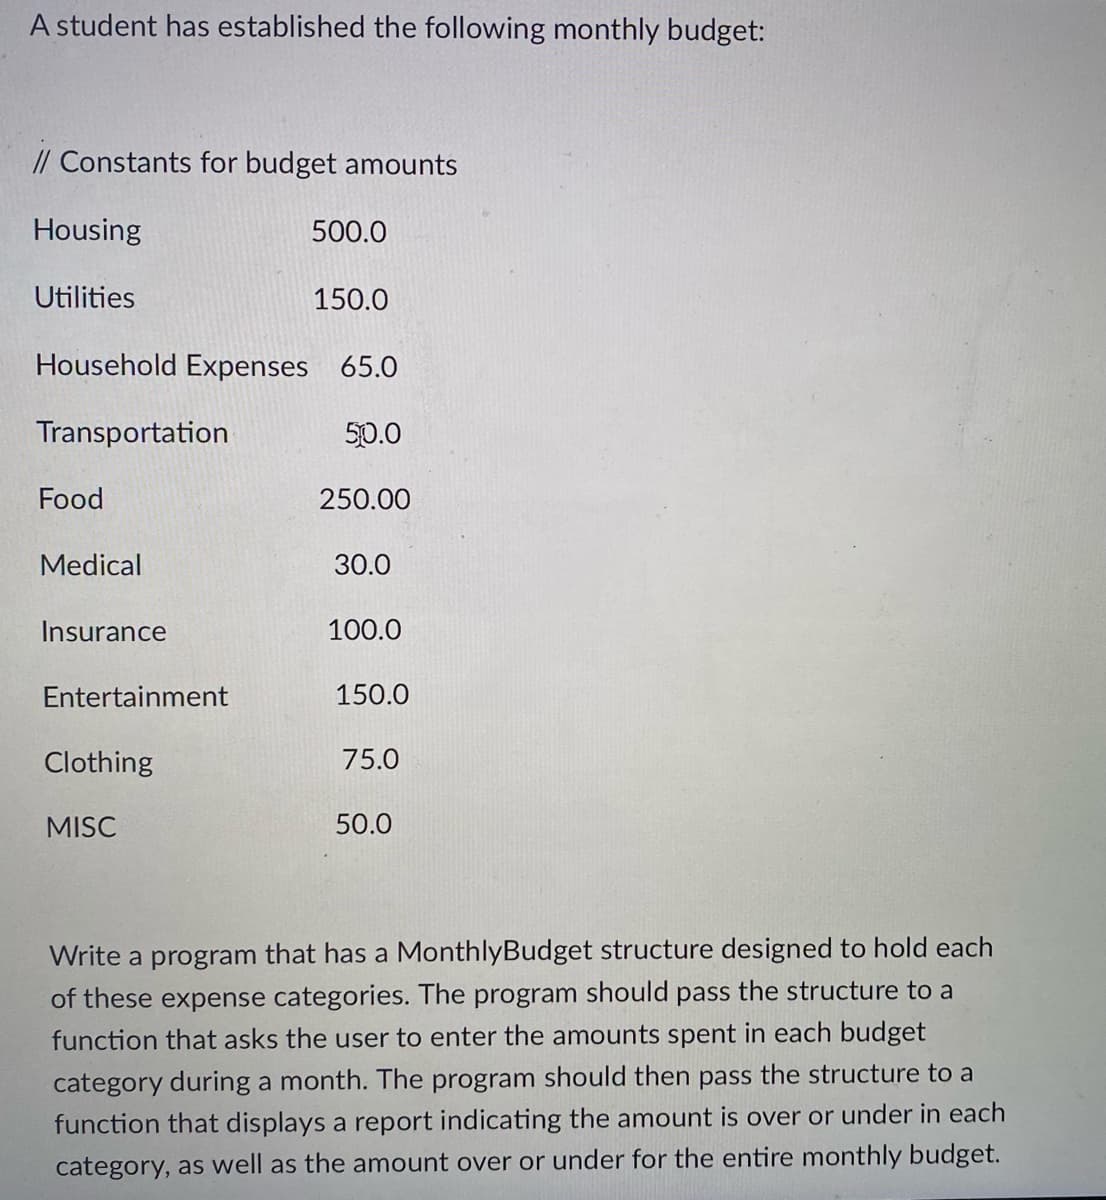 A student has established the following monthly budget:
// Constants for budget amounts
Housing
500.0
Utilities
150.0
Household Expenses 65.0
Transportation
50.0
Food
250.00
Medical
30.0
Insurance
100.0
Entertainment
150.0
Clothing
75.0
MISC
50.0
Write a program that has a MonthlyBudget structure designed to hold each
of these expense categories. The program should pass the structure to a
function that asks the user to enter the amounts spent in each budget
category during a month. The program should then pass the structure to a
function that displays a report indicating the amount is over or under in each
category, as well as the amount over or under for the entire monthly budget.
